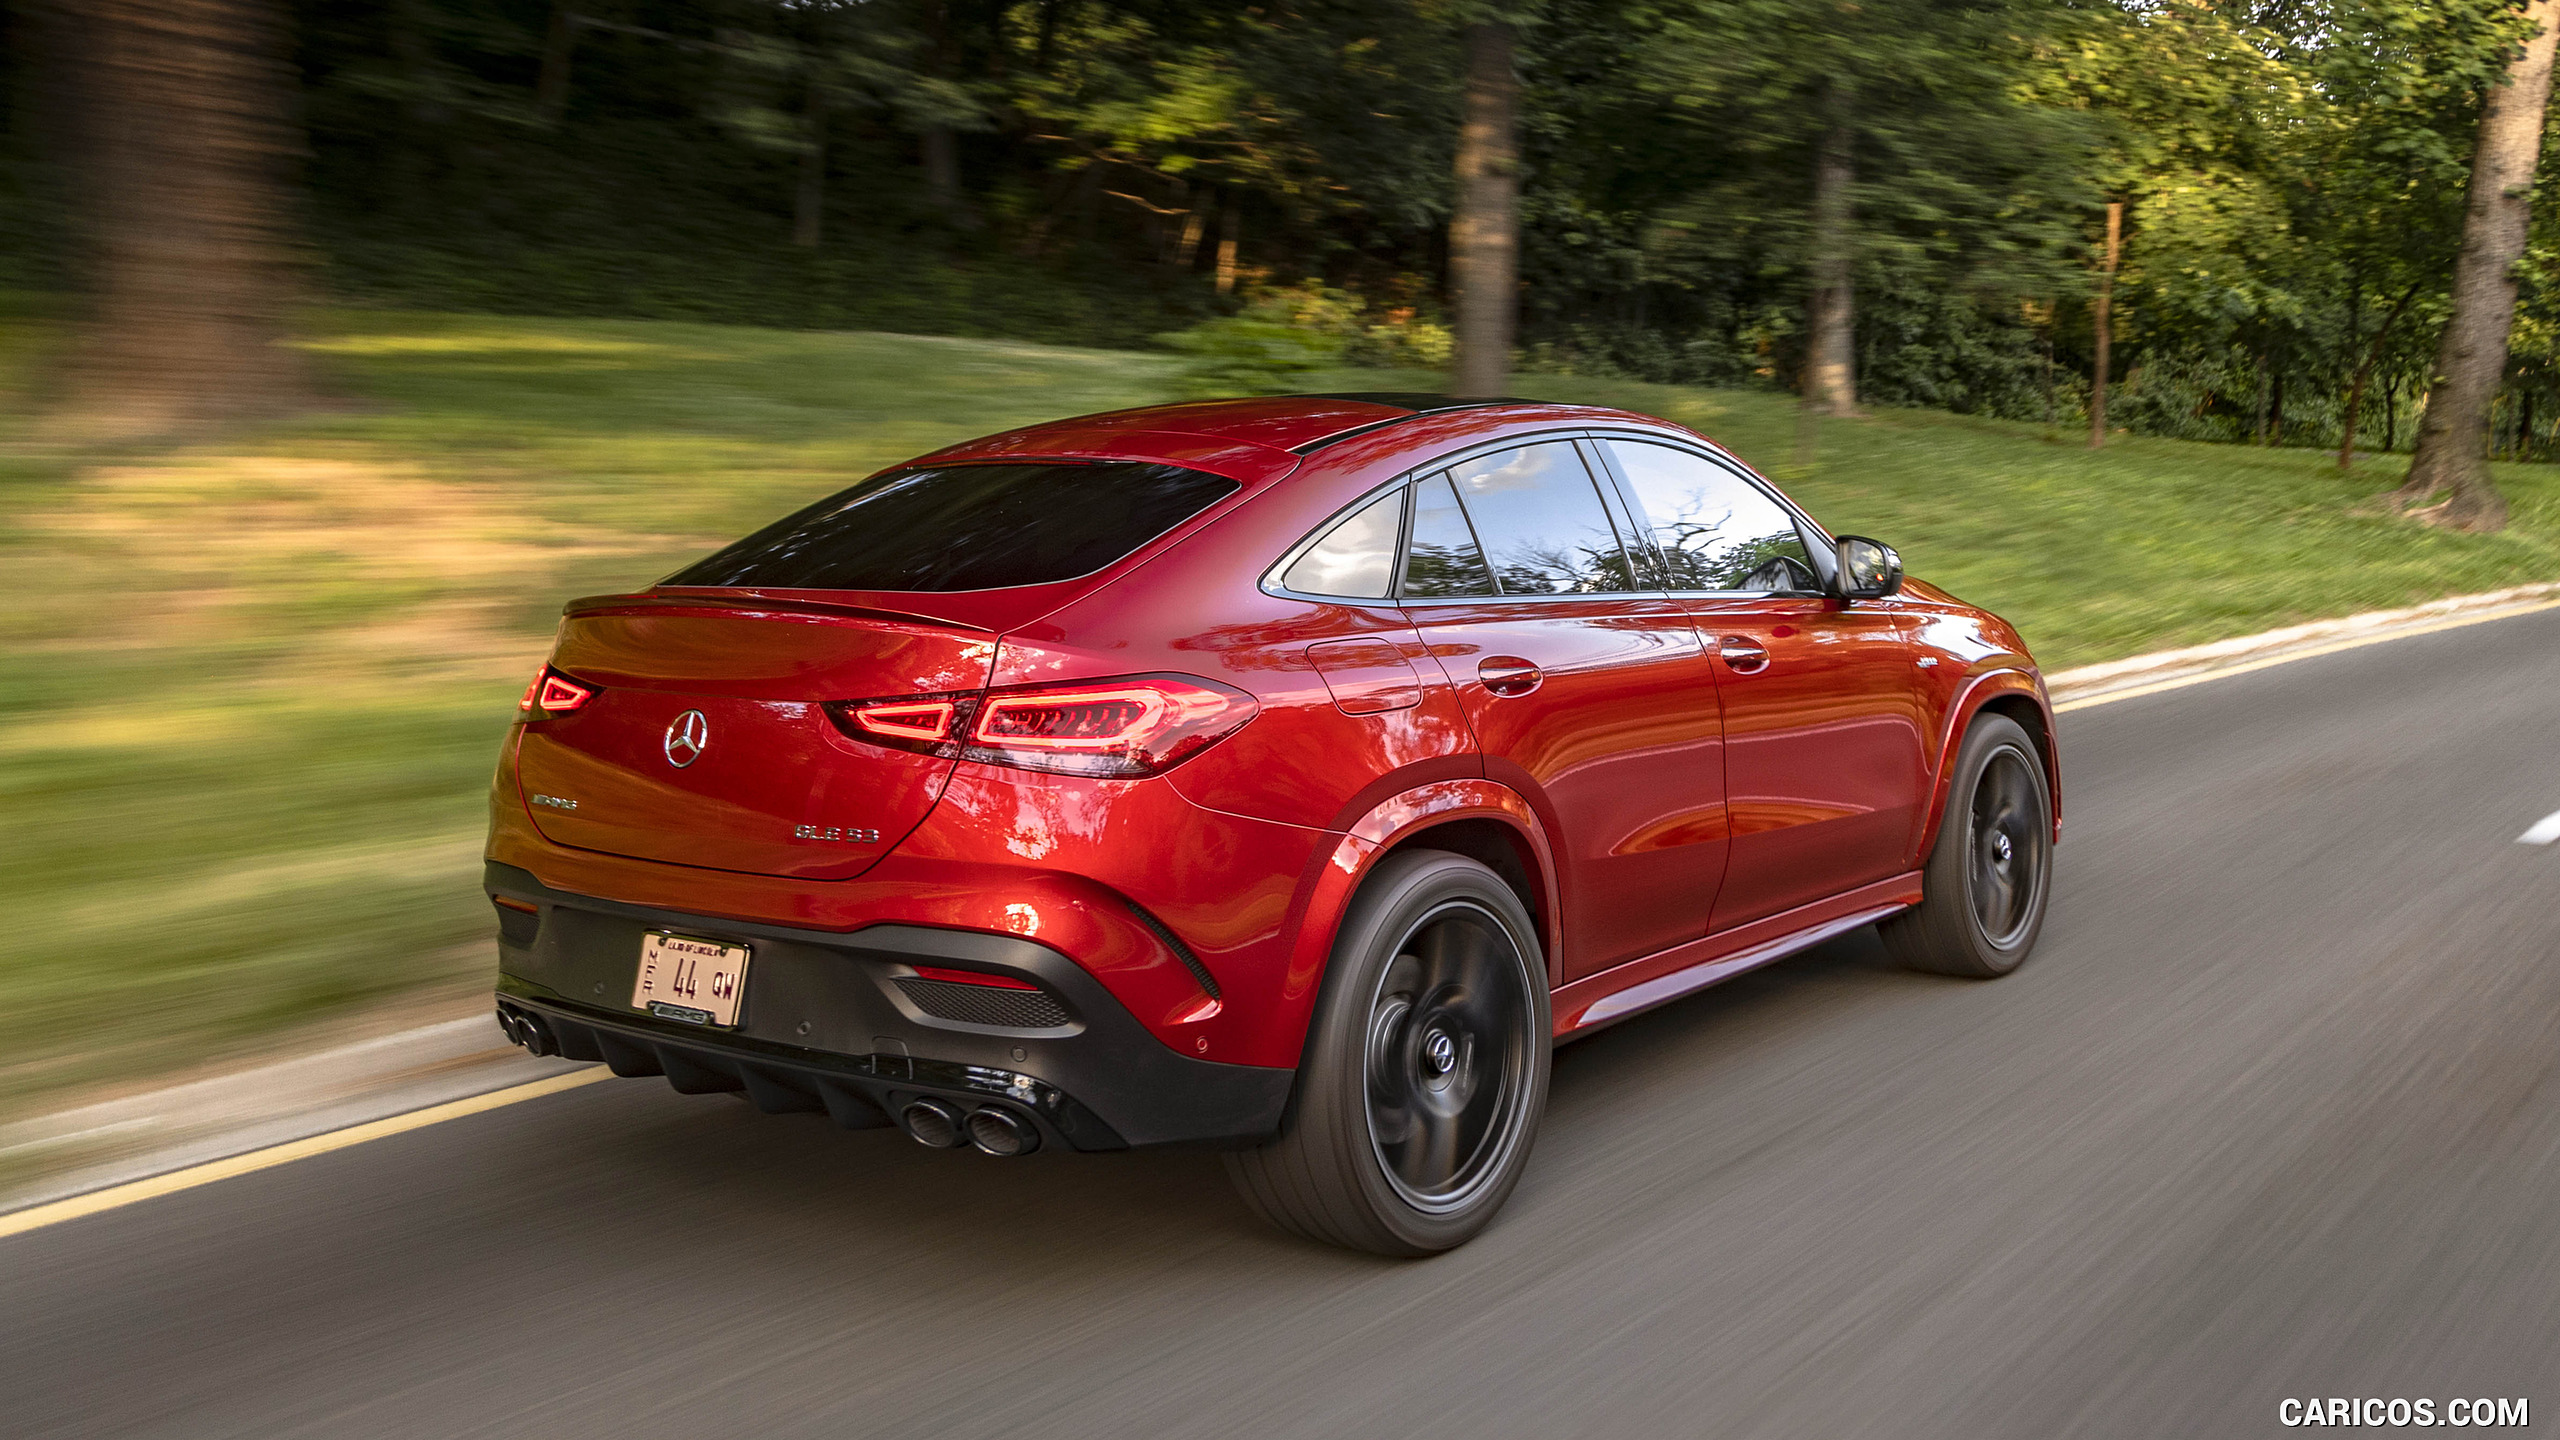 2021 Mercedes-AMG GLE 53 Coupe - Rear Three-Quarter, #95 of 178